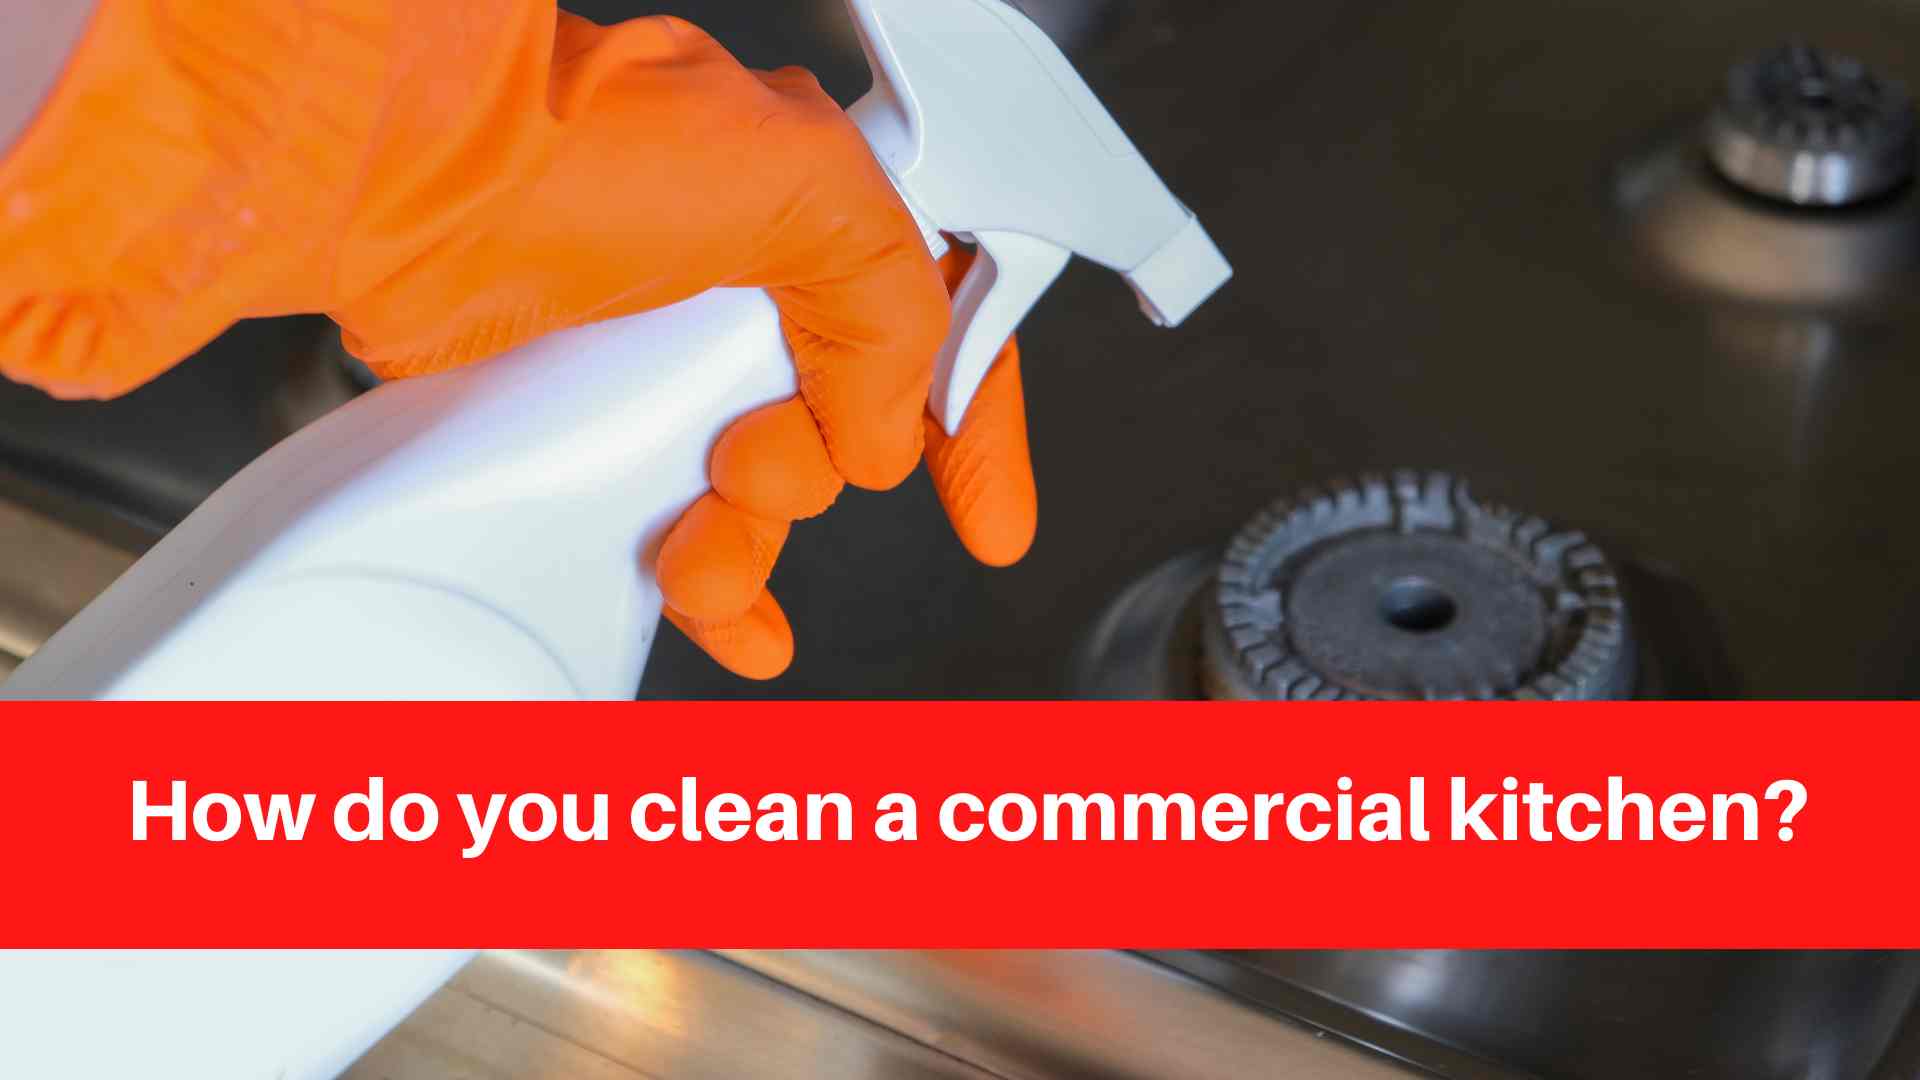 How do you clean a commercial kitchen